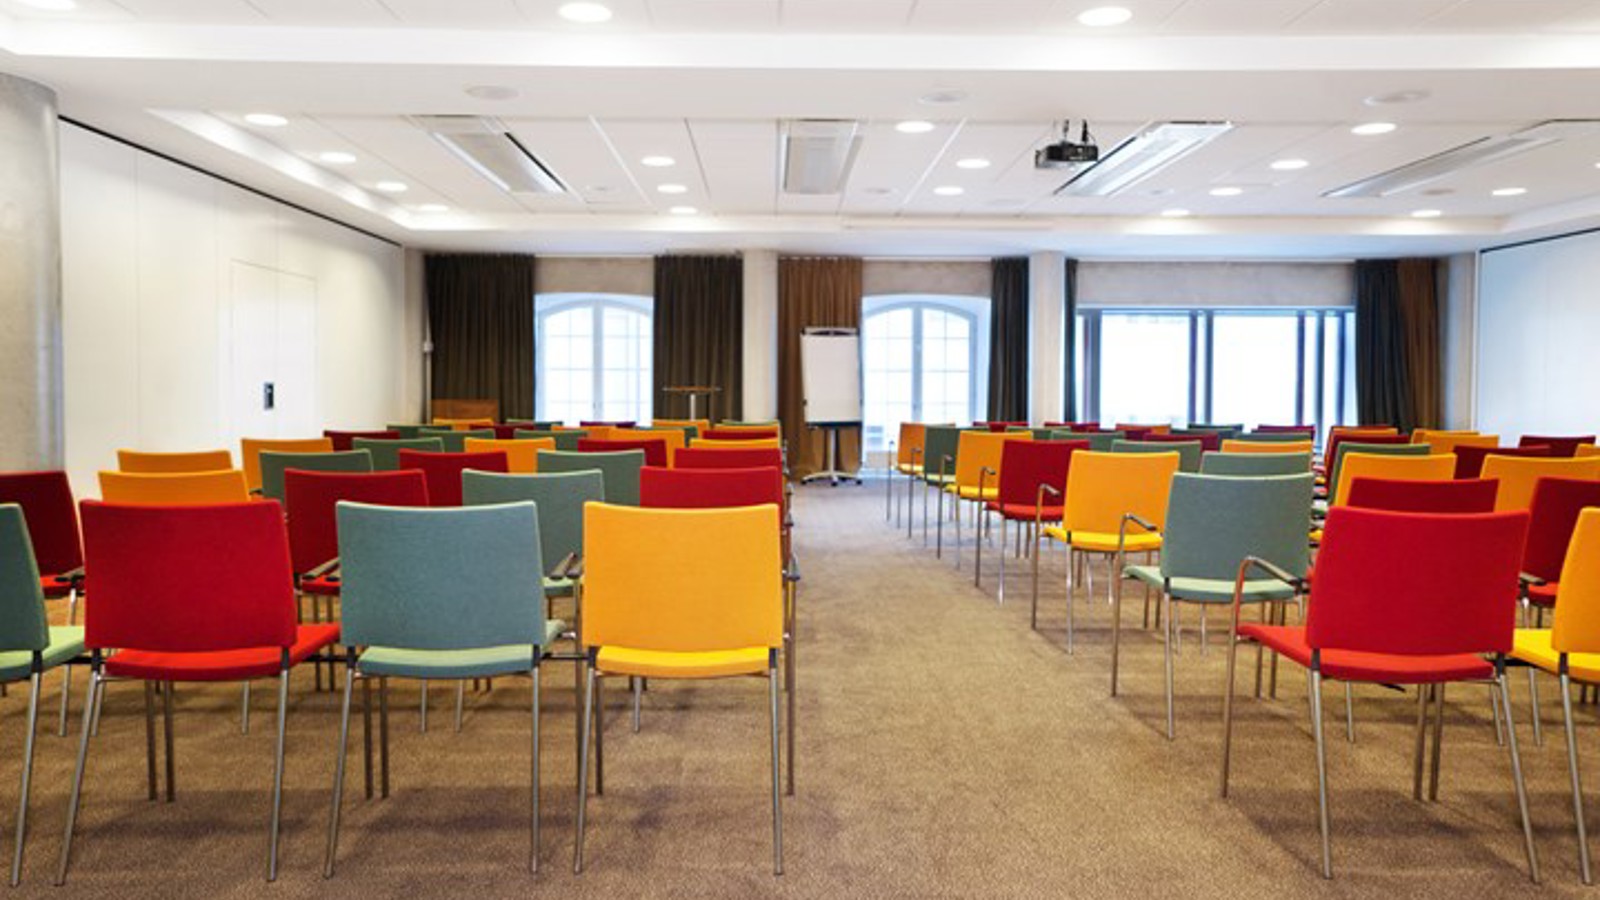 Conference room with colorful chairs, white walls and large windows